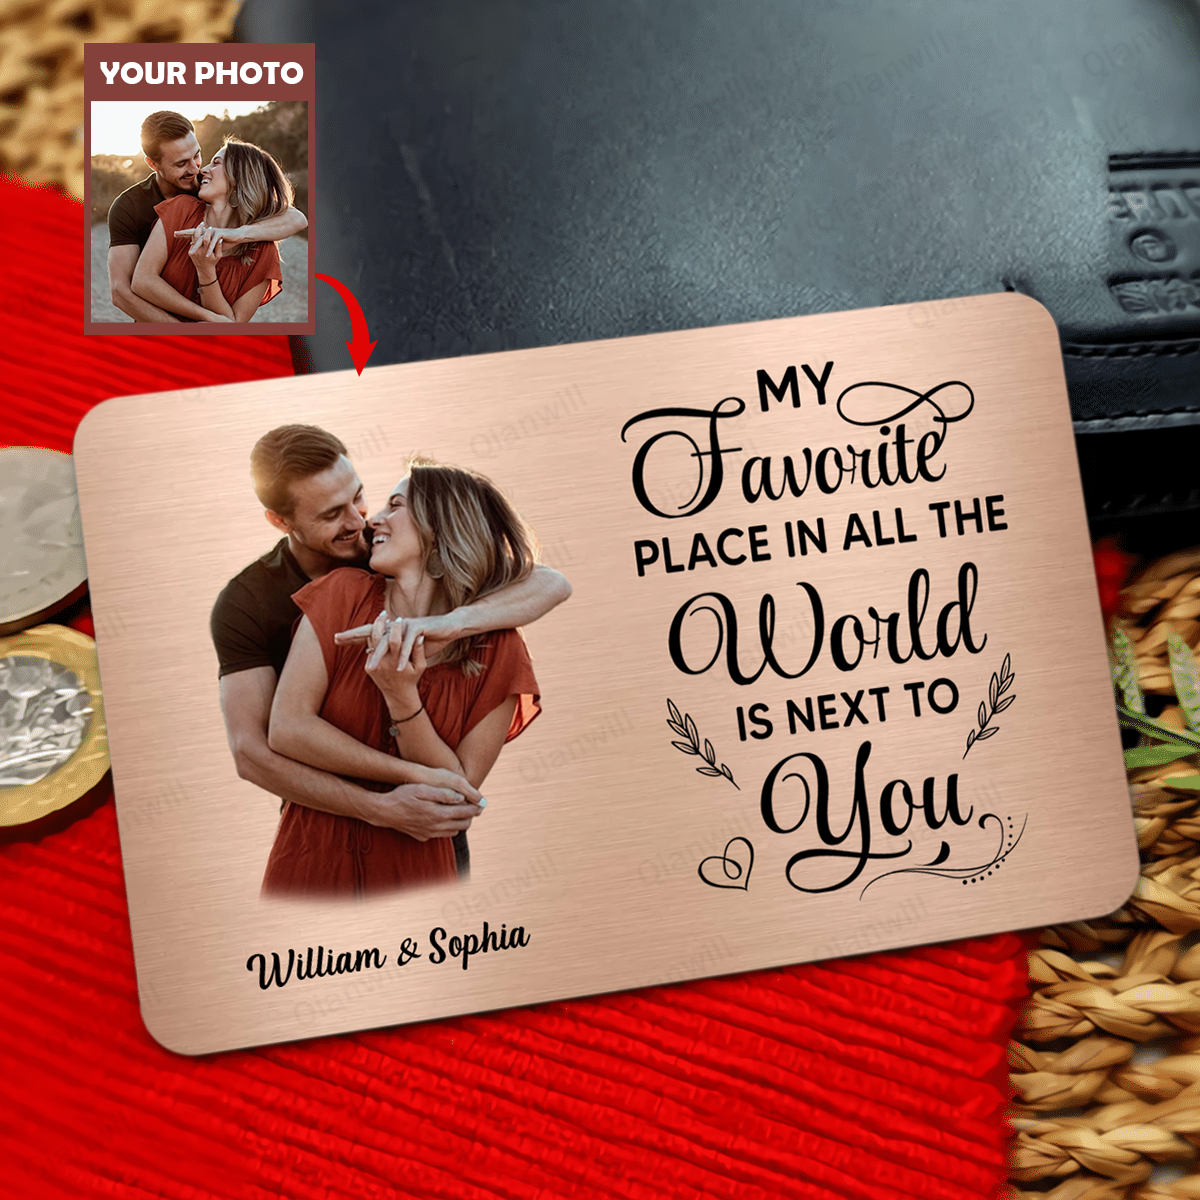 Custom Photo Personalized Couple Aluminum Wallet Card - The Day I Met You